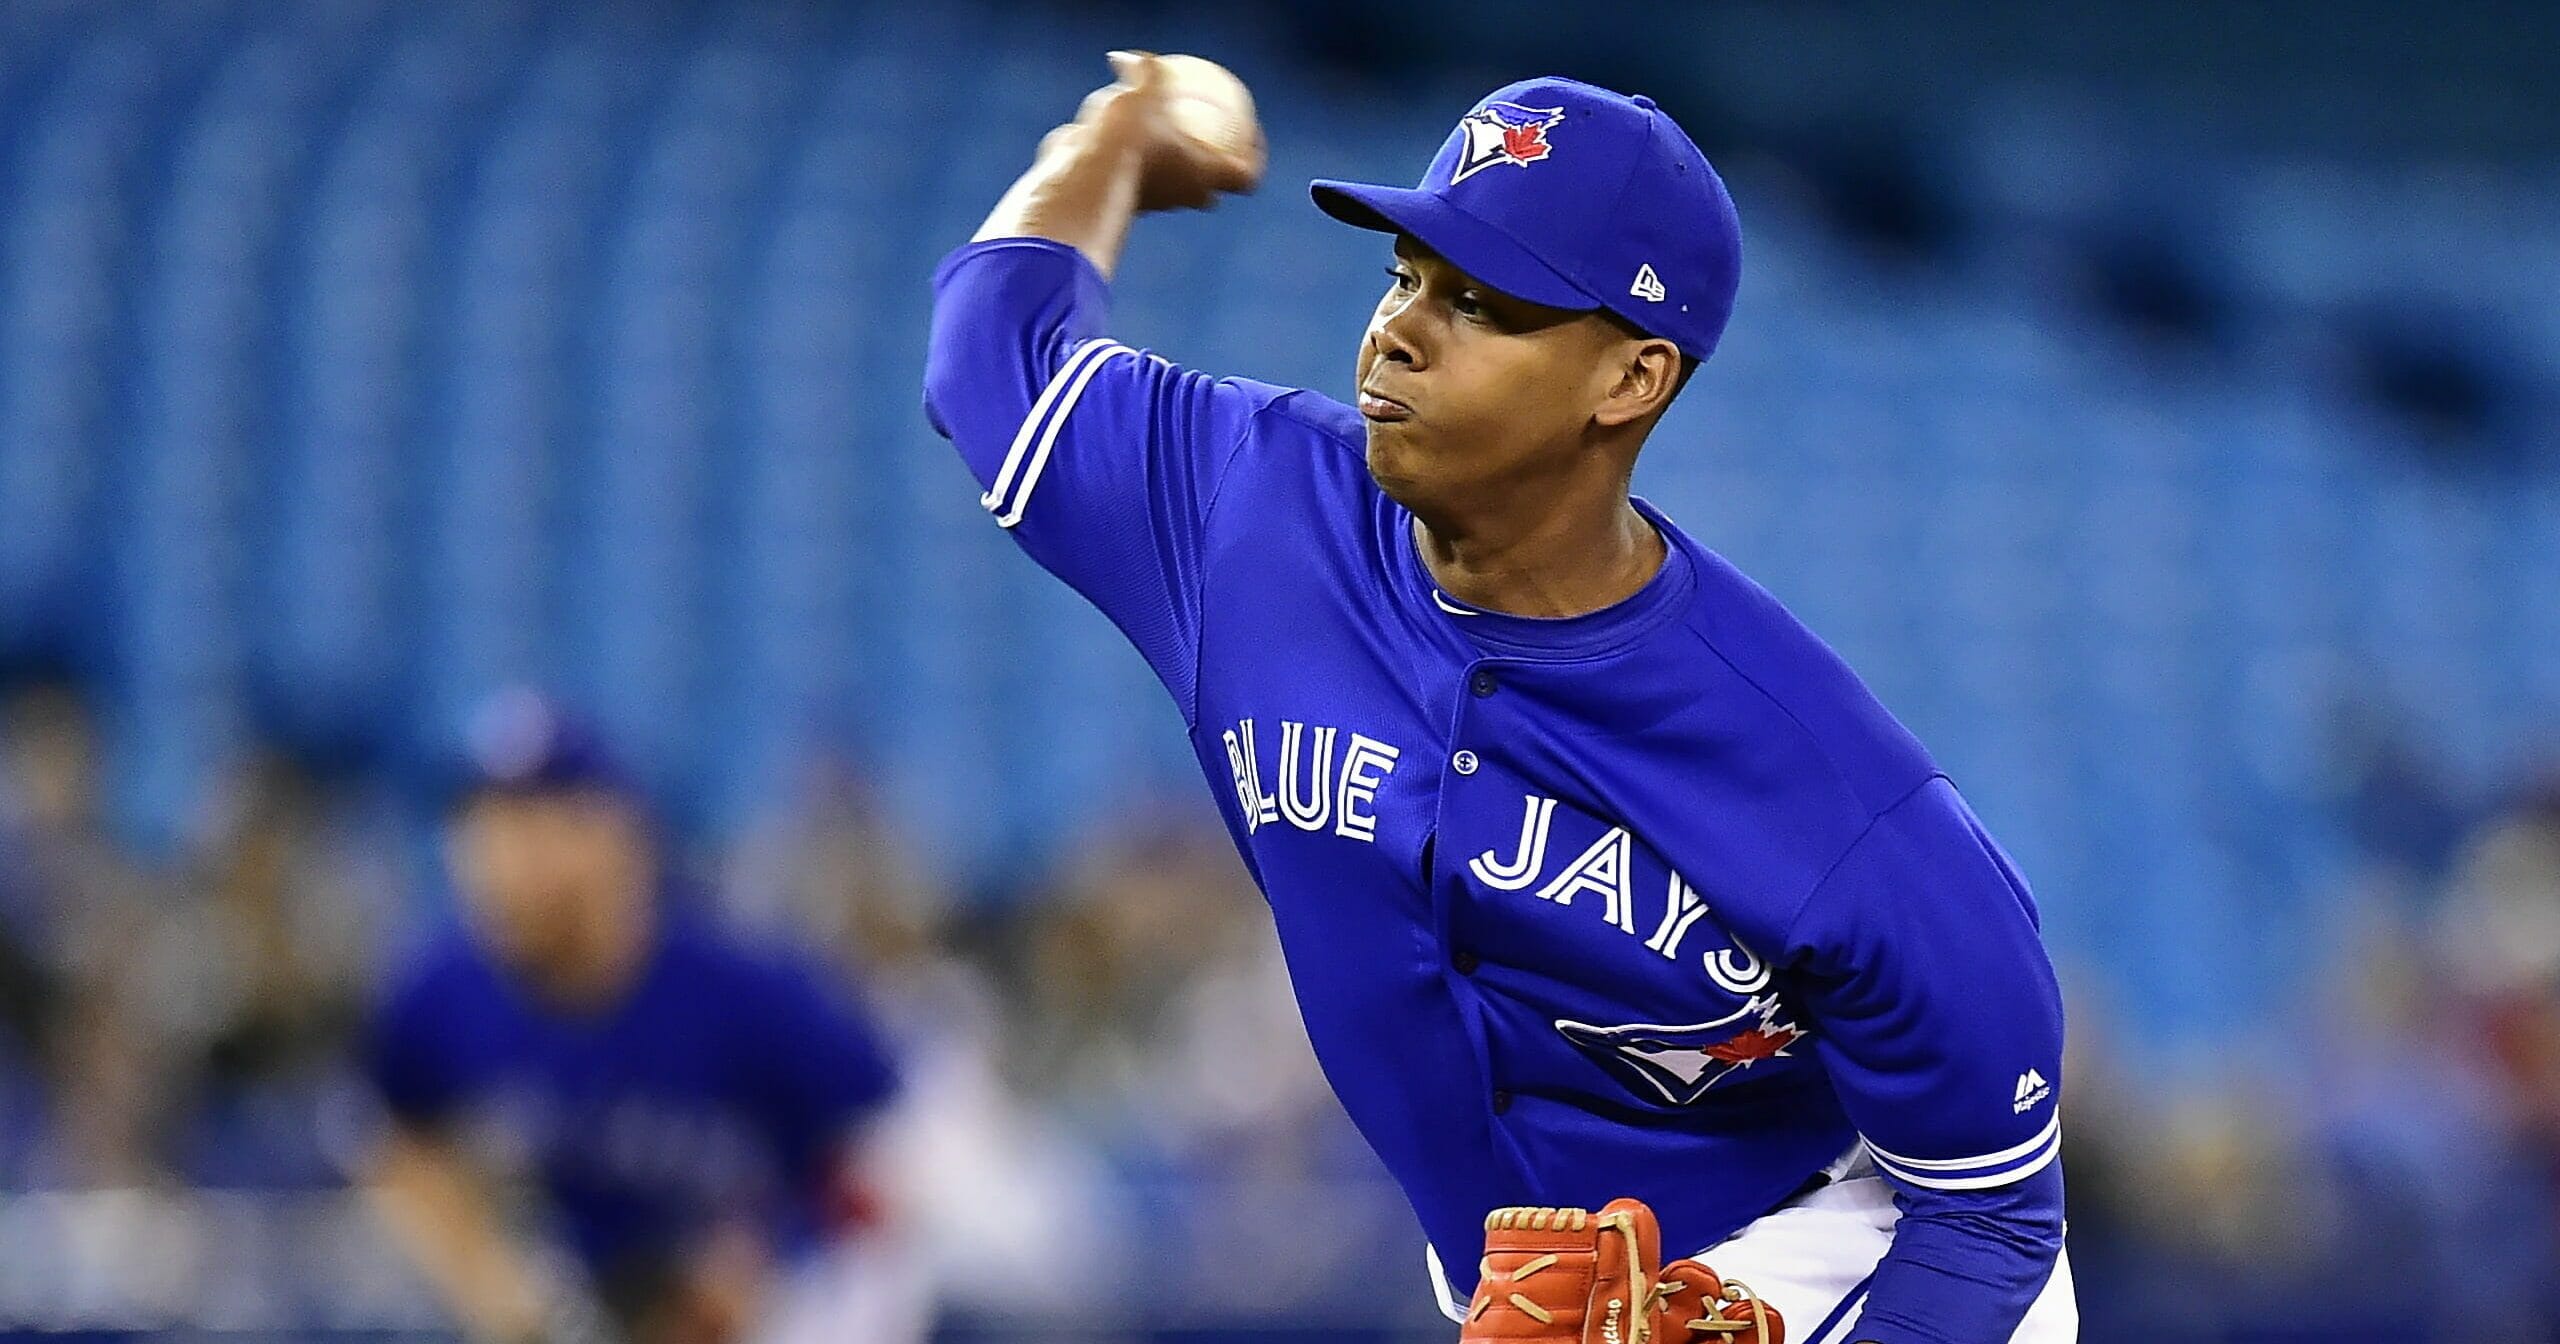 Toronto Blue Jays relief pitcher Elvis Luciano (65) works against the Detroit Tigers during the seventh inning of a baseball game in Toronto on Sunday, March 31, 2019.